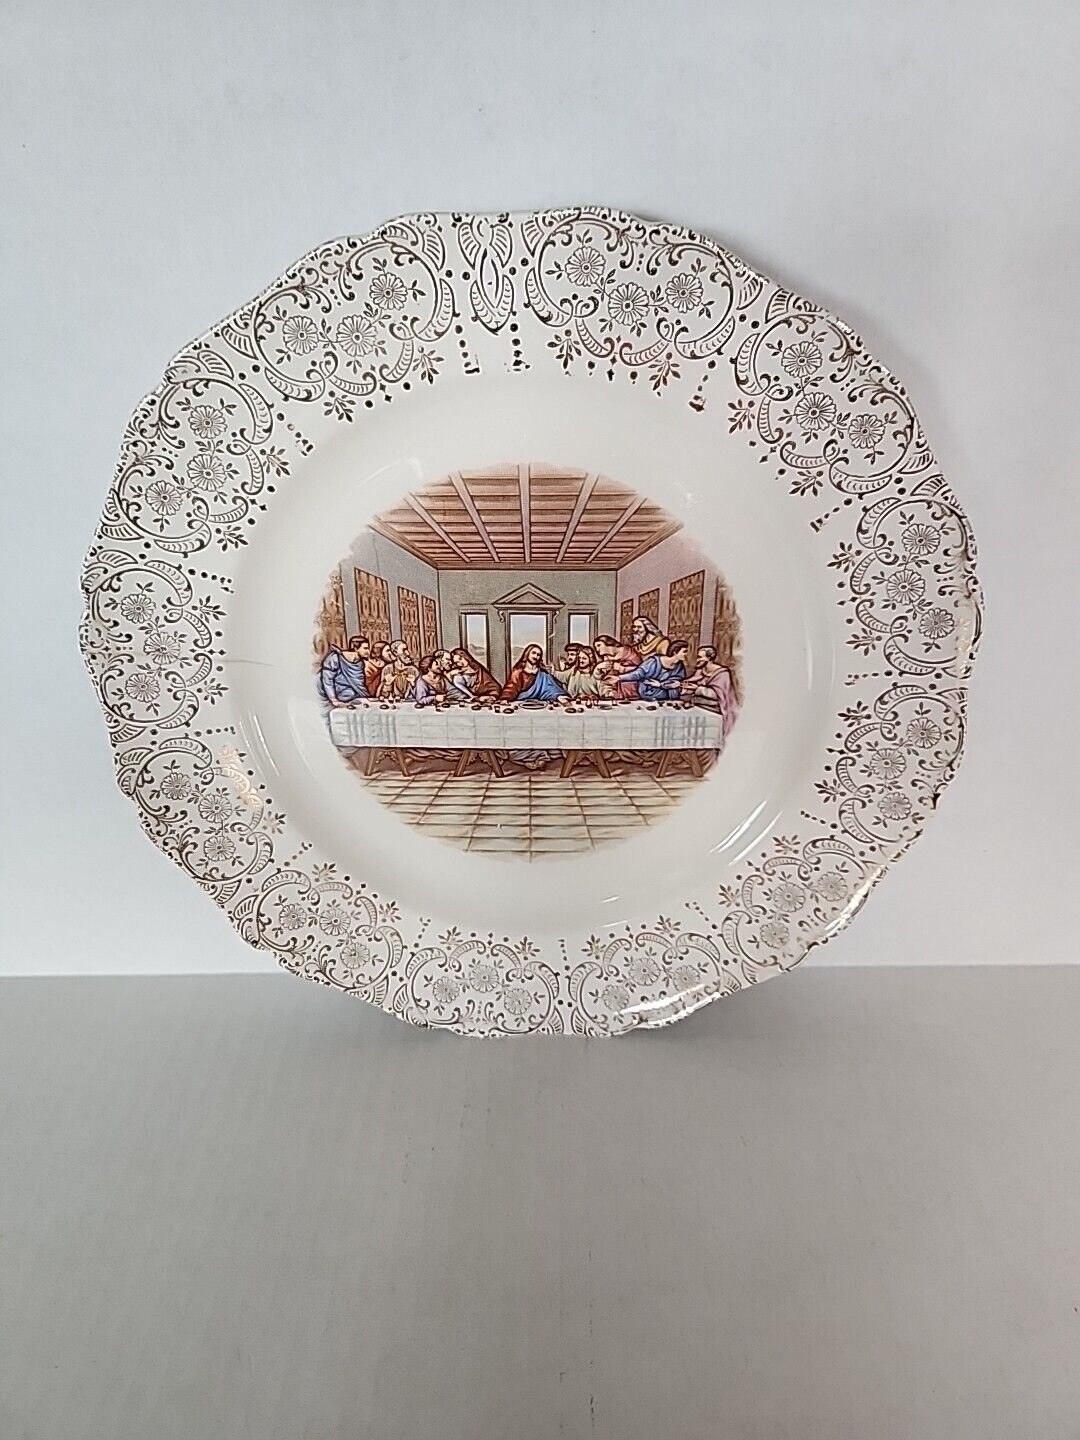 Vintage The Last Supper Plate - 22k Gold Plating - Small Crack - United Novelty